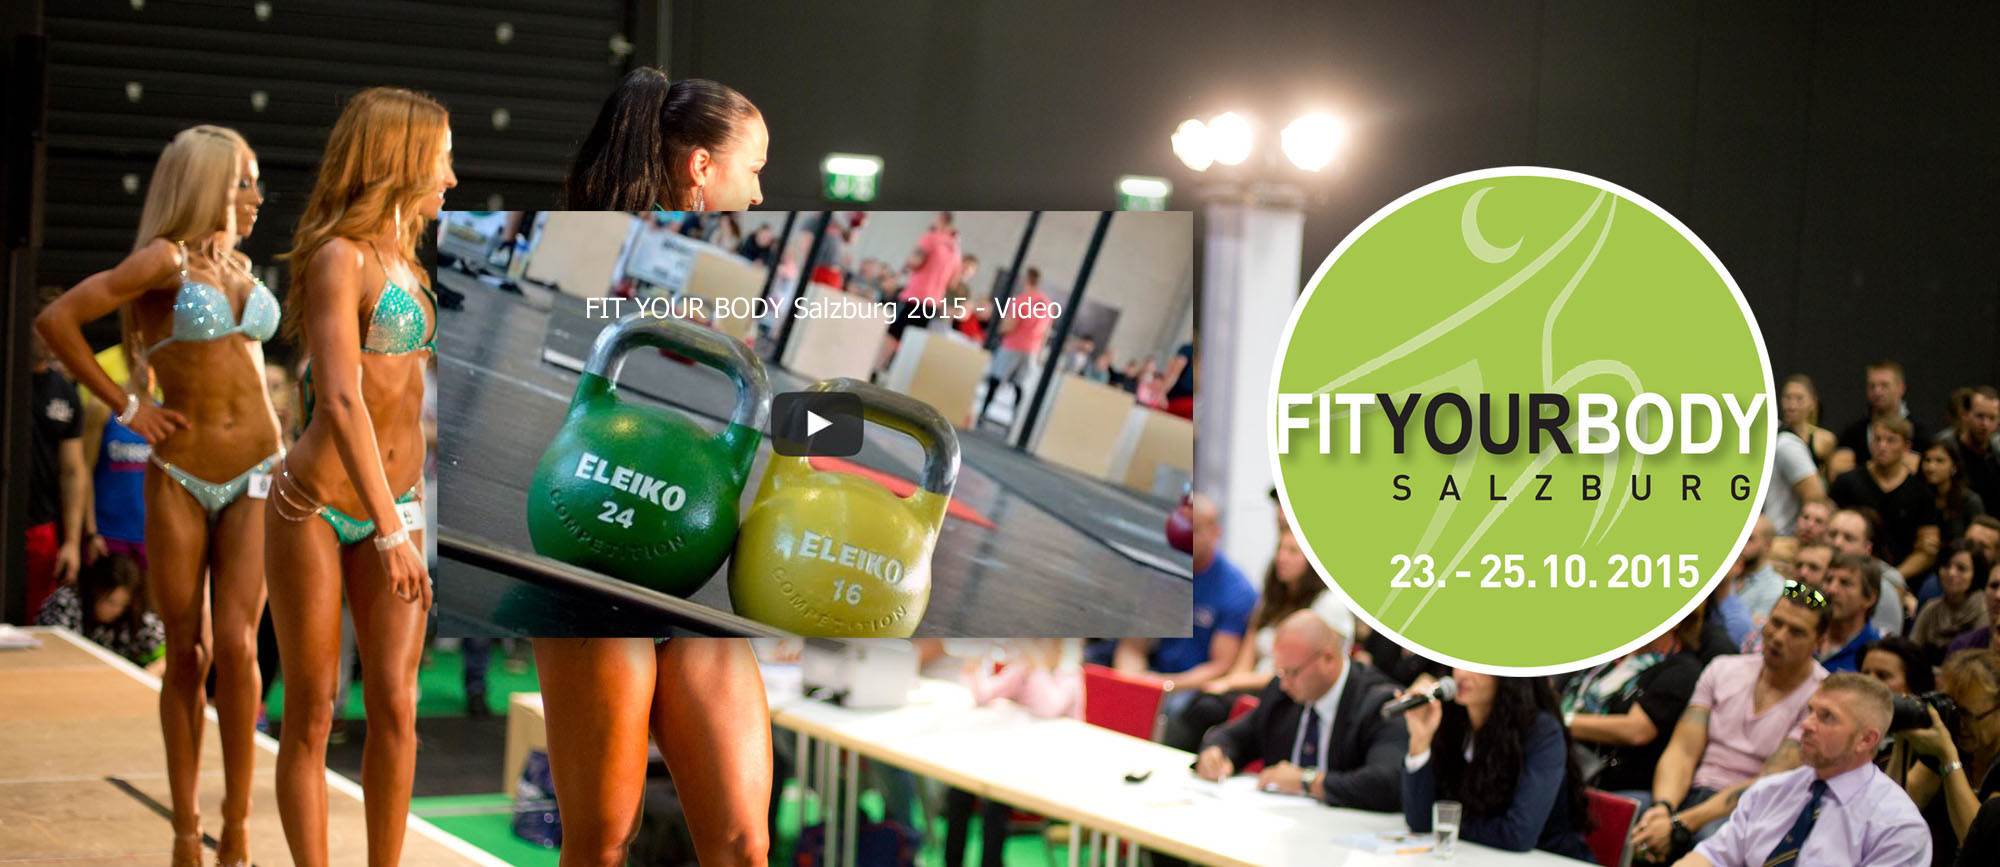 FitYourBody Messe 2015